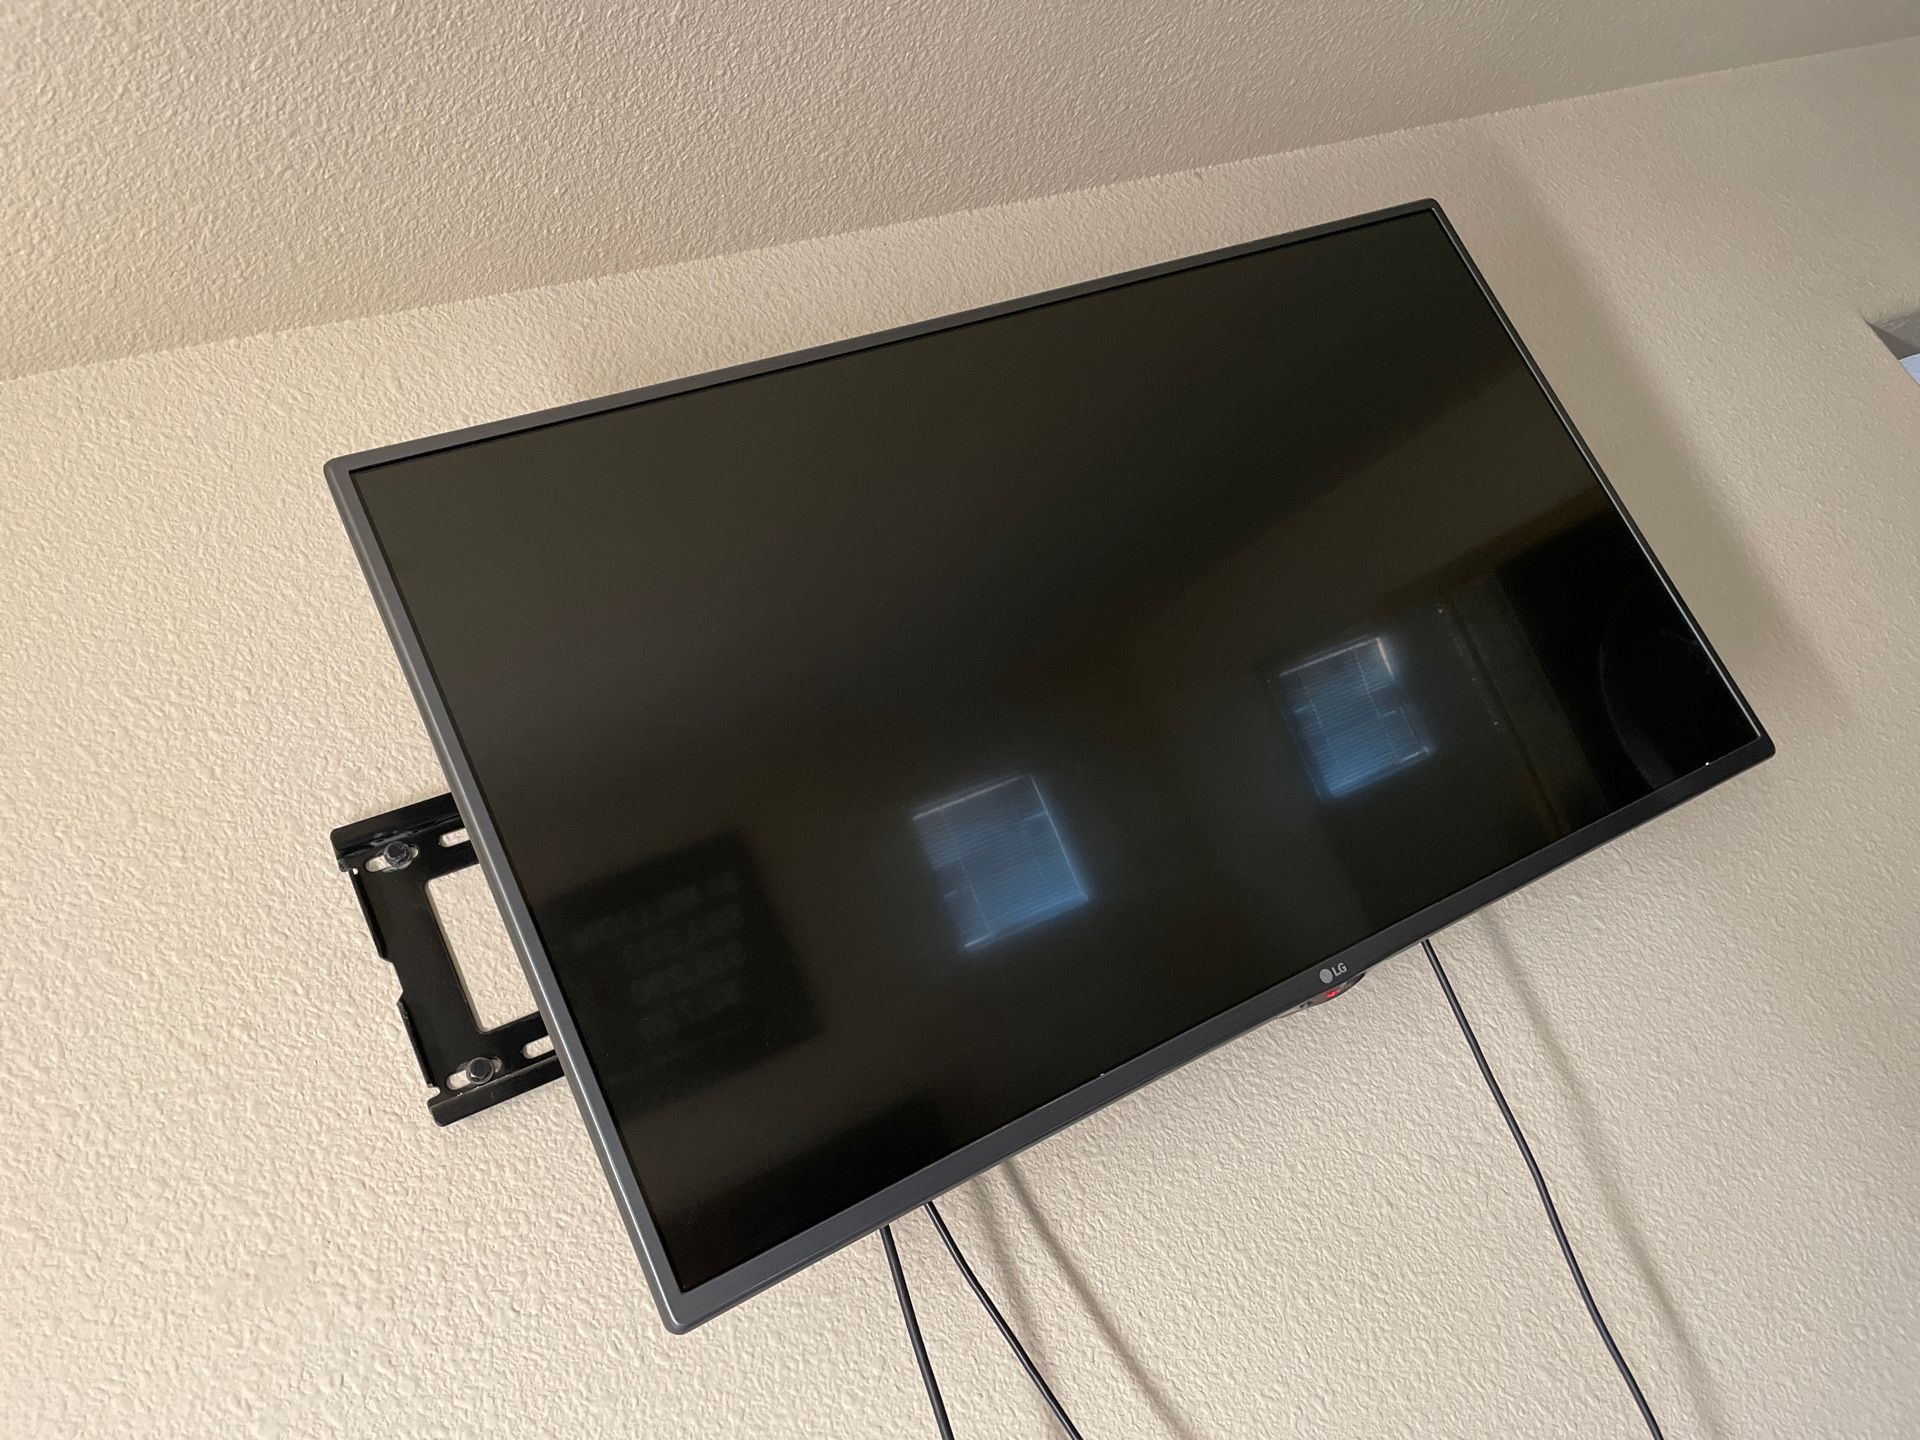 47” flat screen TV with wall mount